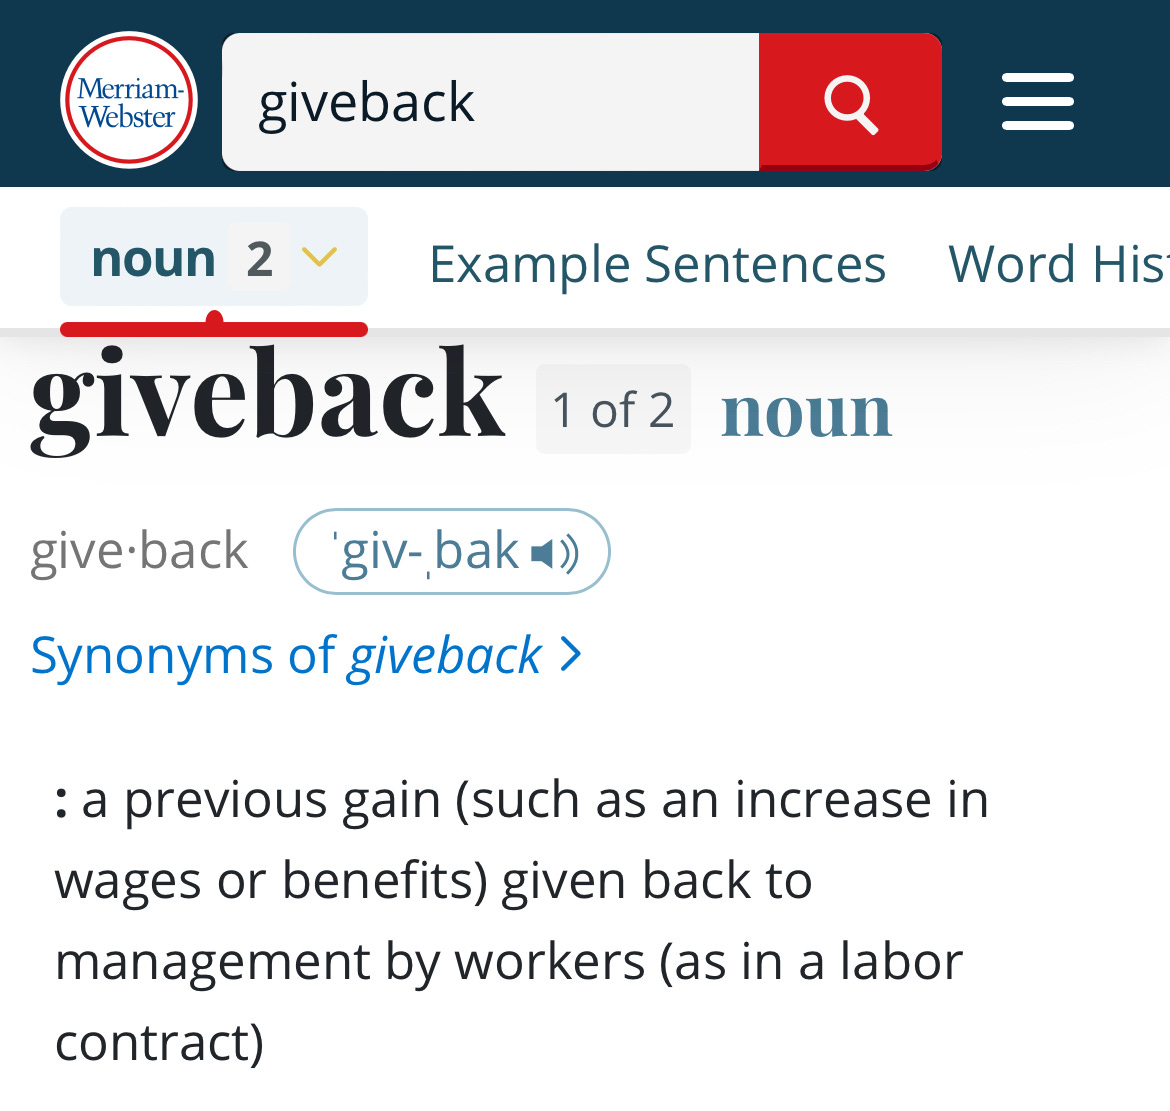 UFT Contract 101 What makes a giveback a giveback?